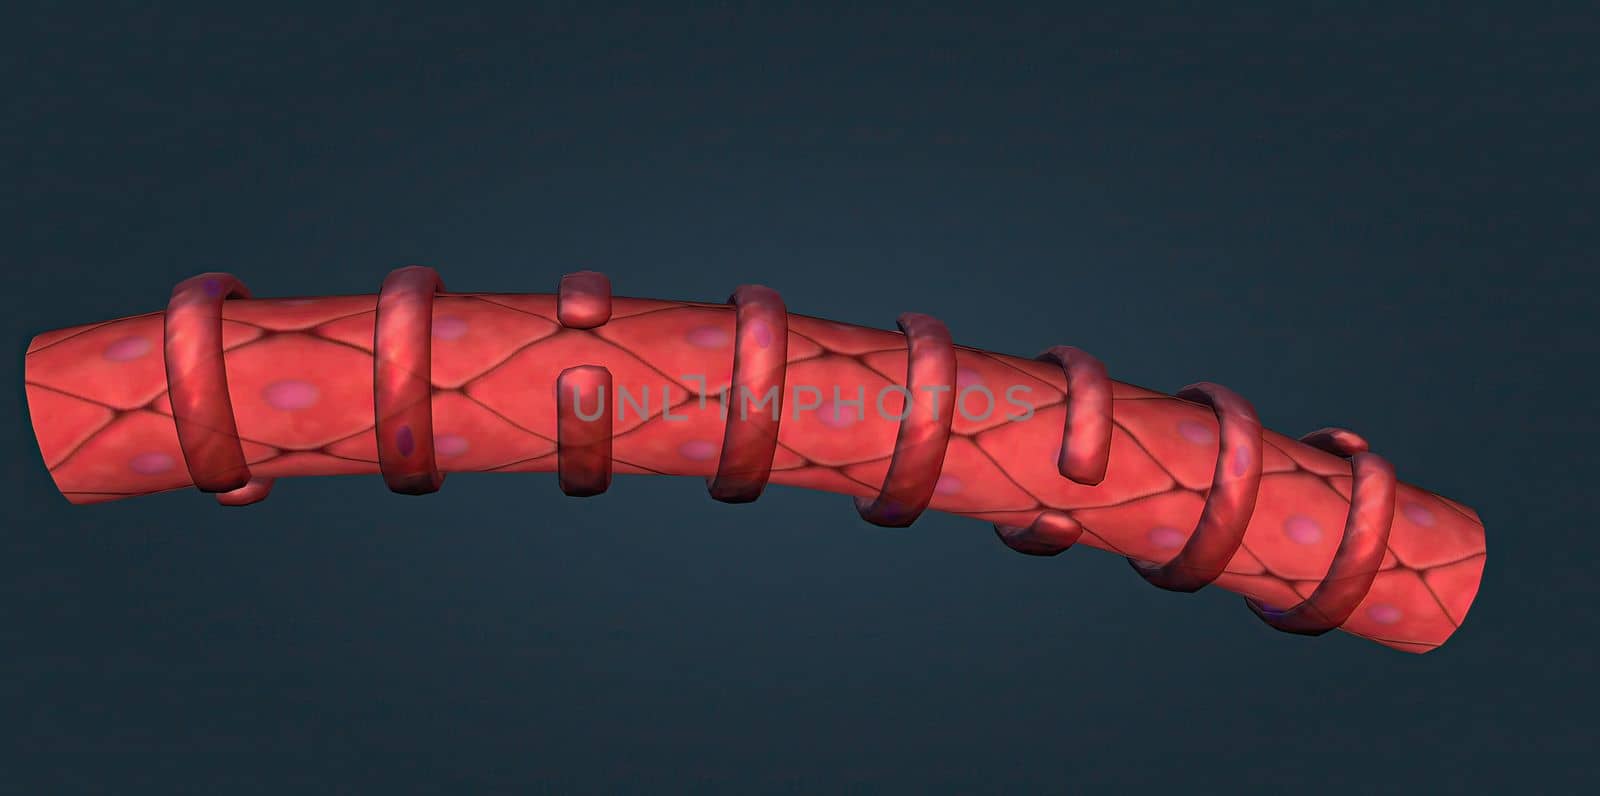 muscle that performs automatic tasks such as constricting blood vessels. 3d illustration